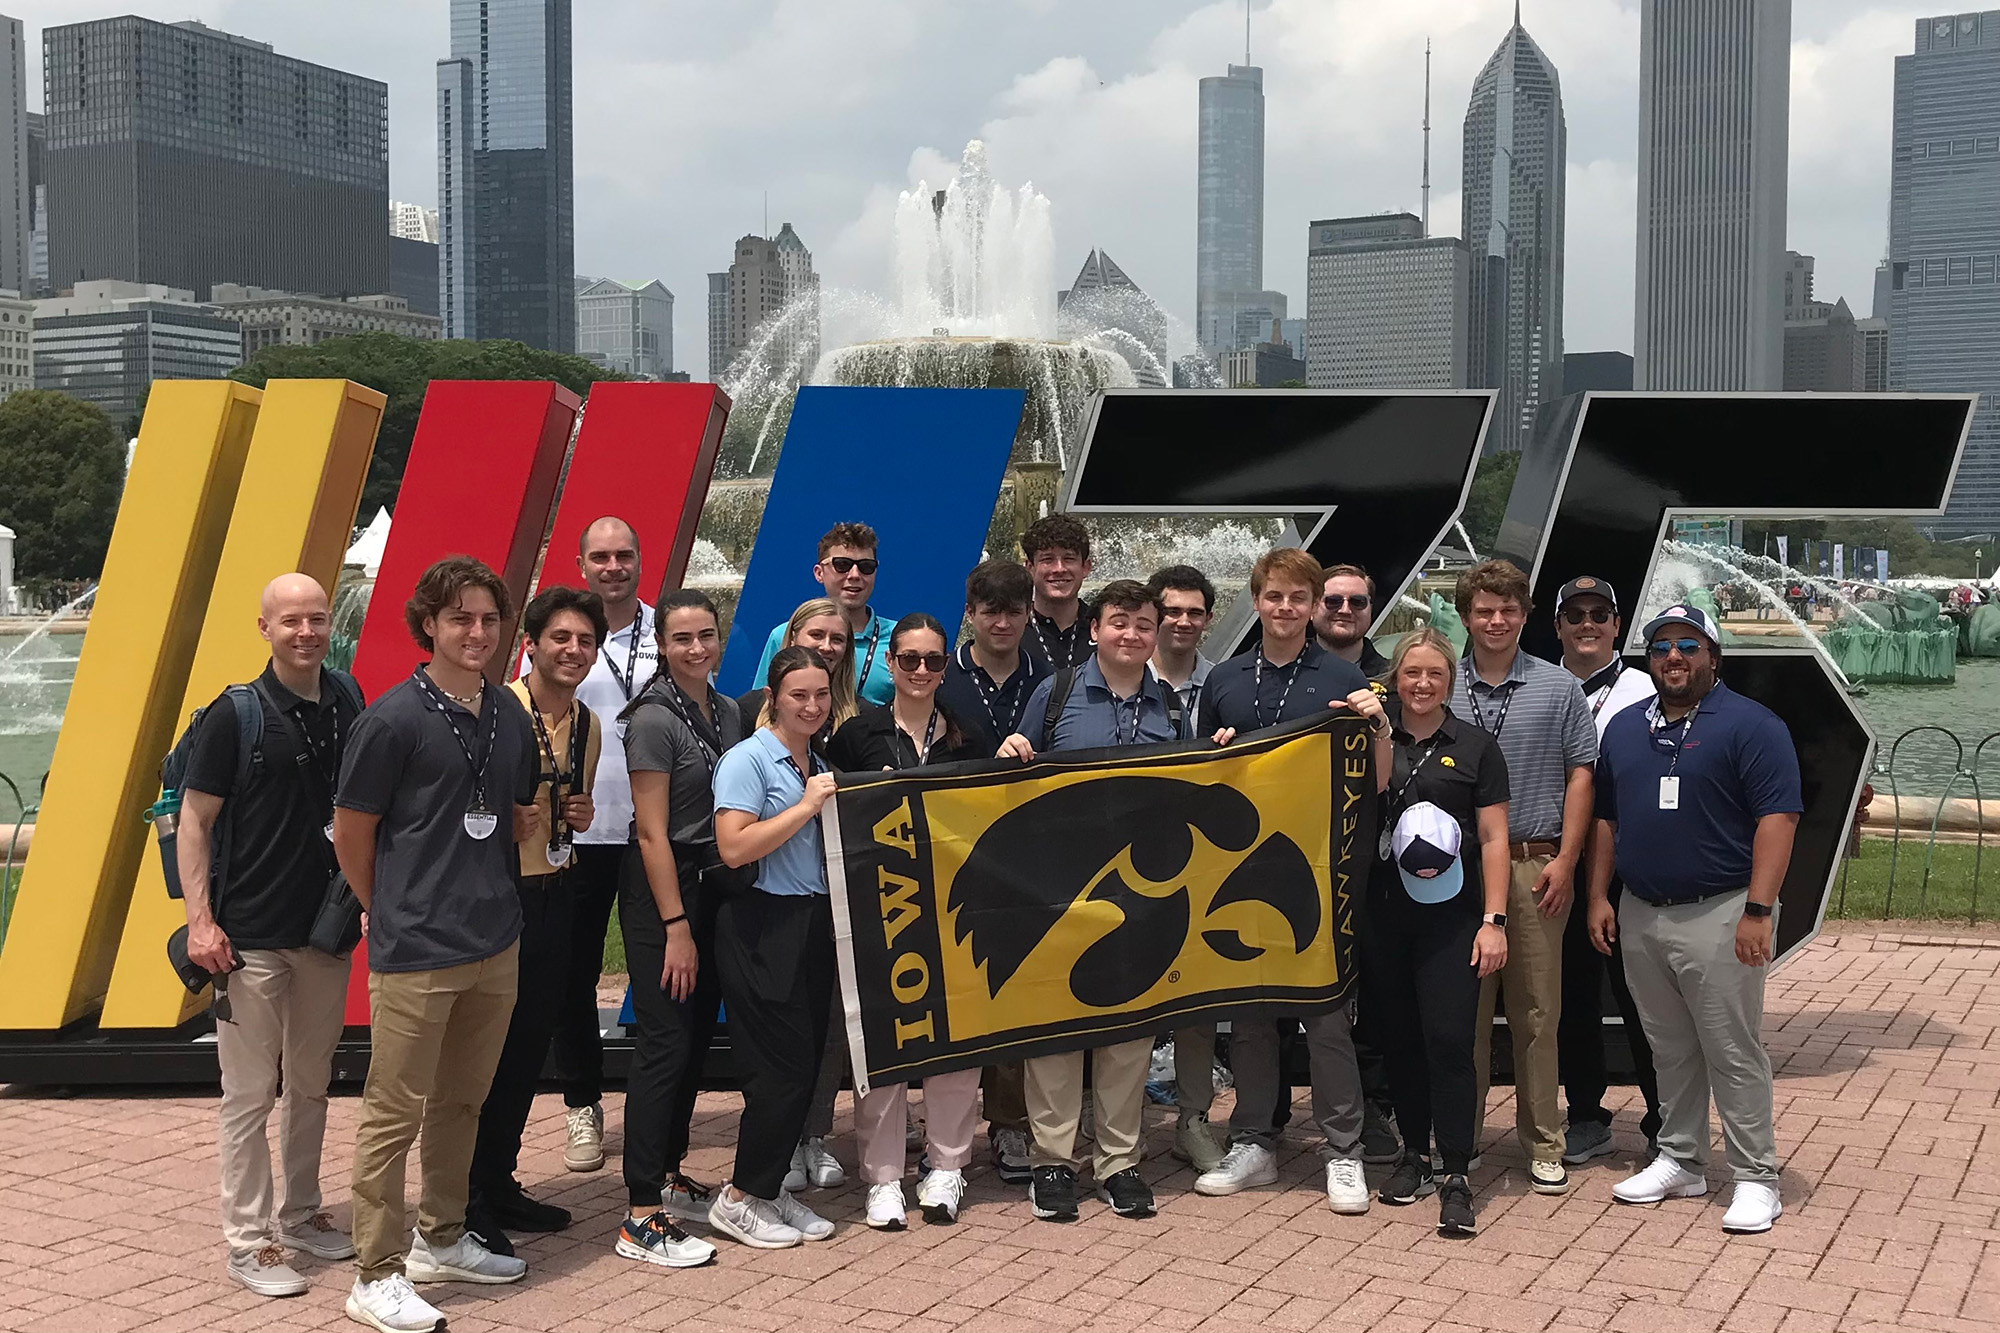 University of Iowa students posing for photo in Chicago, holding a flag with a Tiger hawk